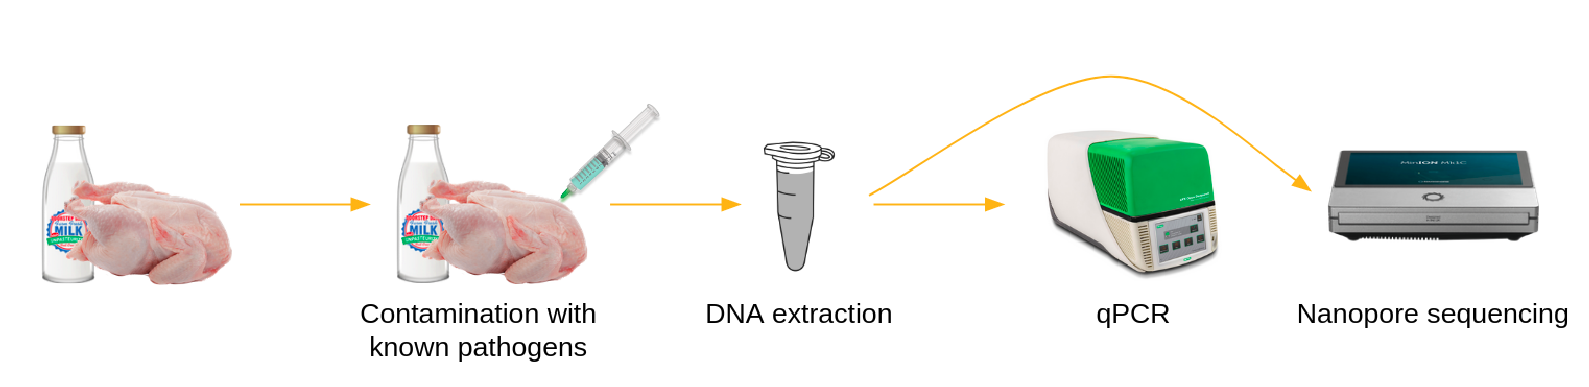 From left to right: Biolytix logo. Chicken + milk. An arrow going to the right toward Chicken + milk and a syringe with "Contamination with known pathogens" written below. An arrow going to the right toward an Eppendorf tube with "DNA extraction" written below,  An arrow going to the right toward a qPCR machine, and another arrow over the qPCR toward a Nanopore sequencing. . 